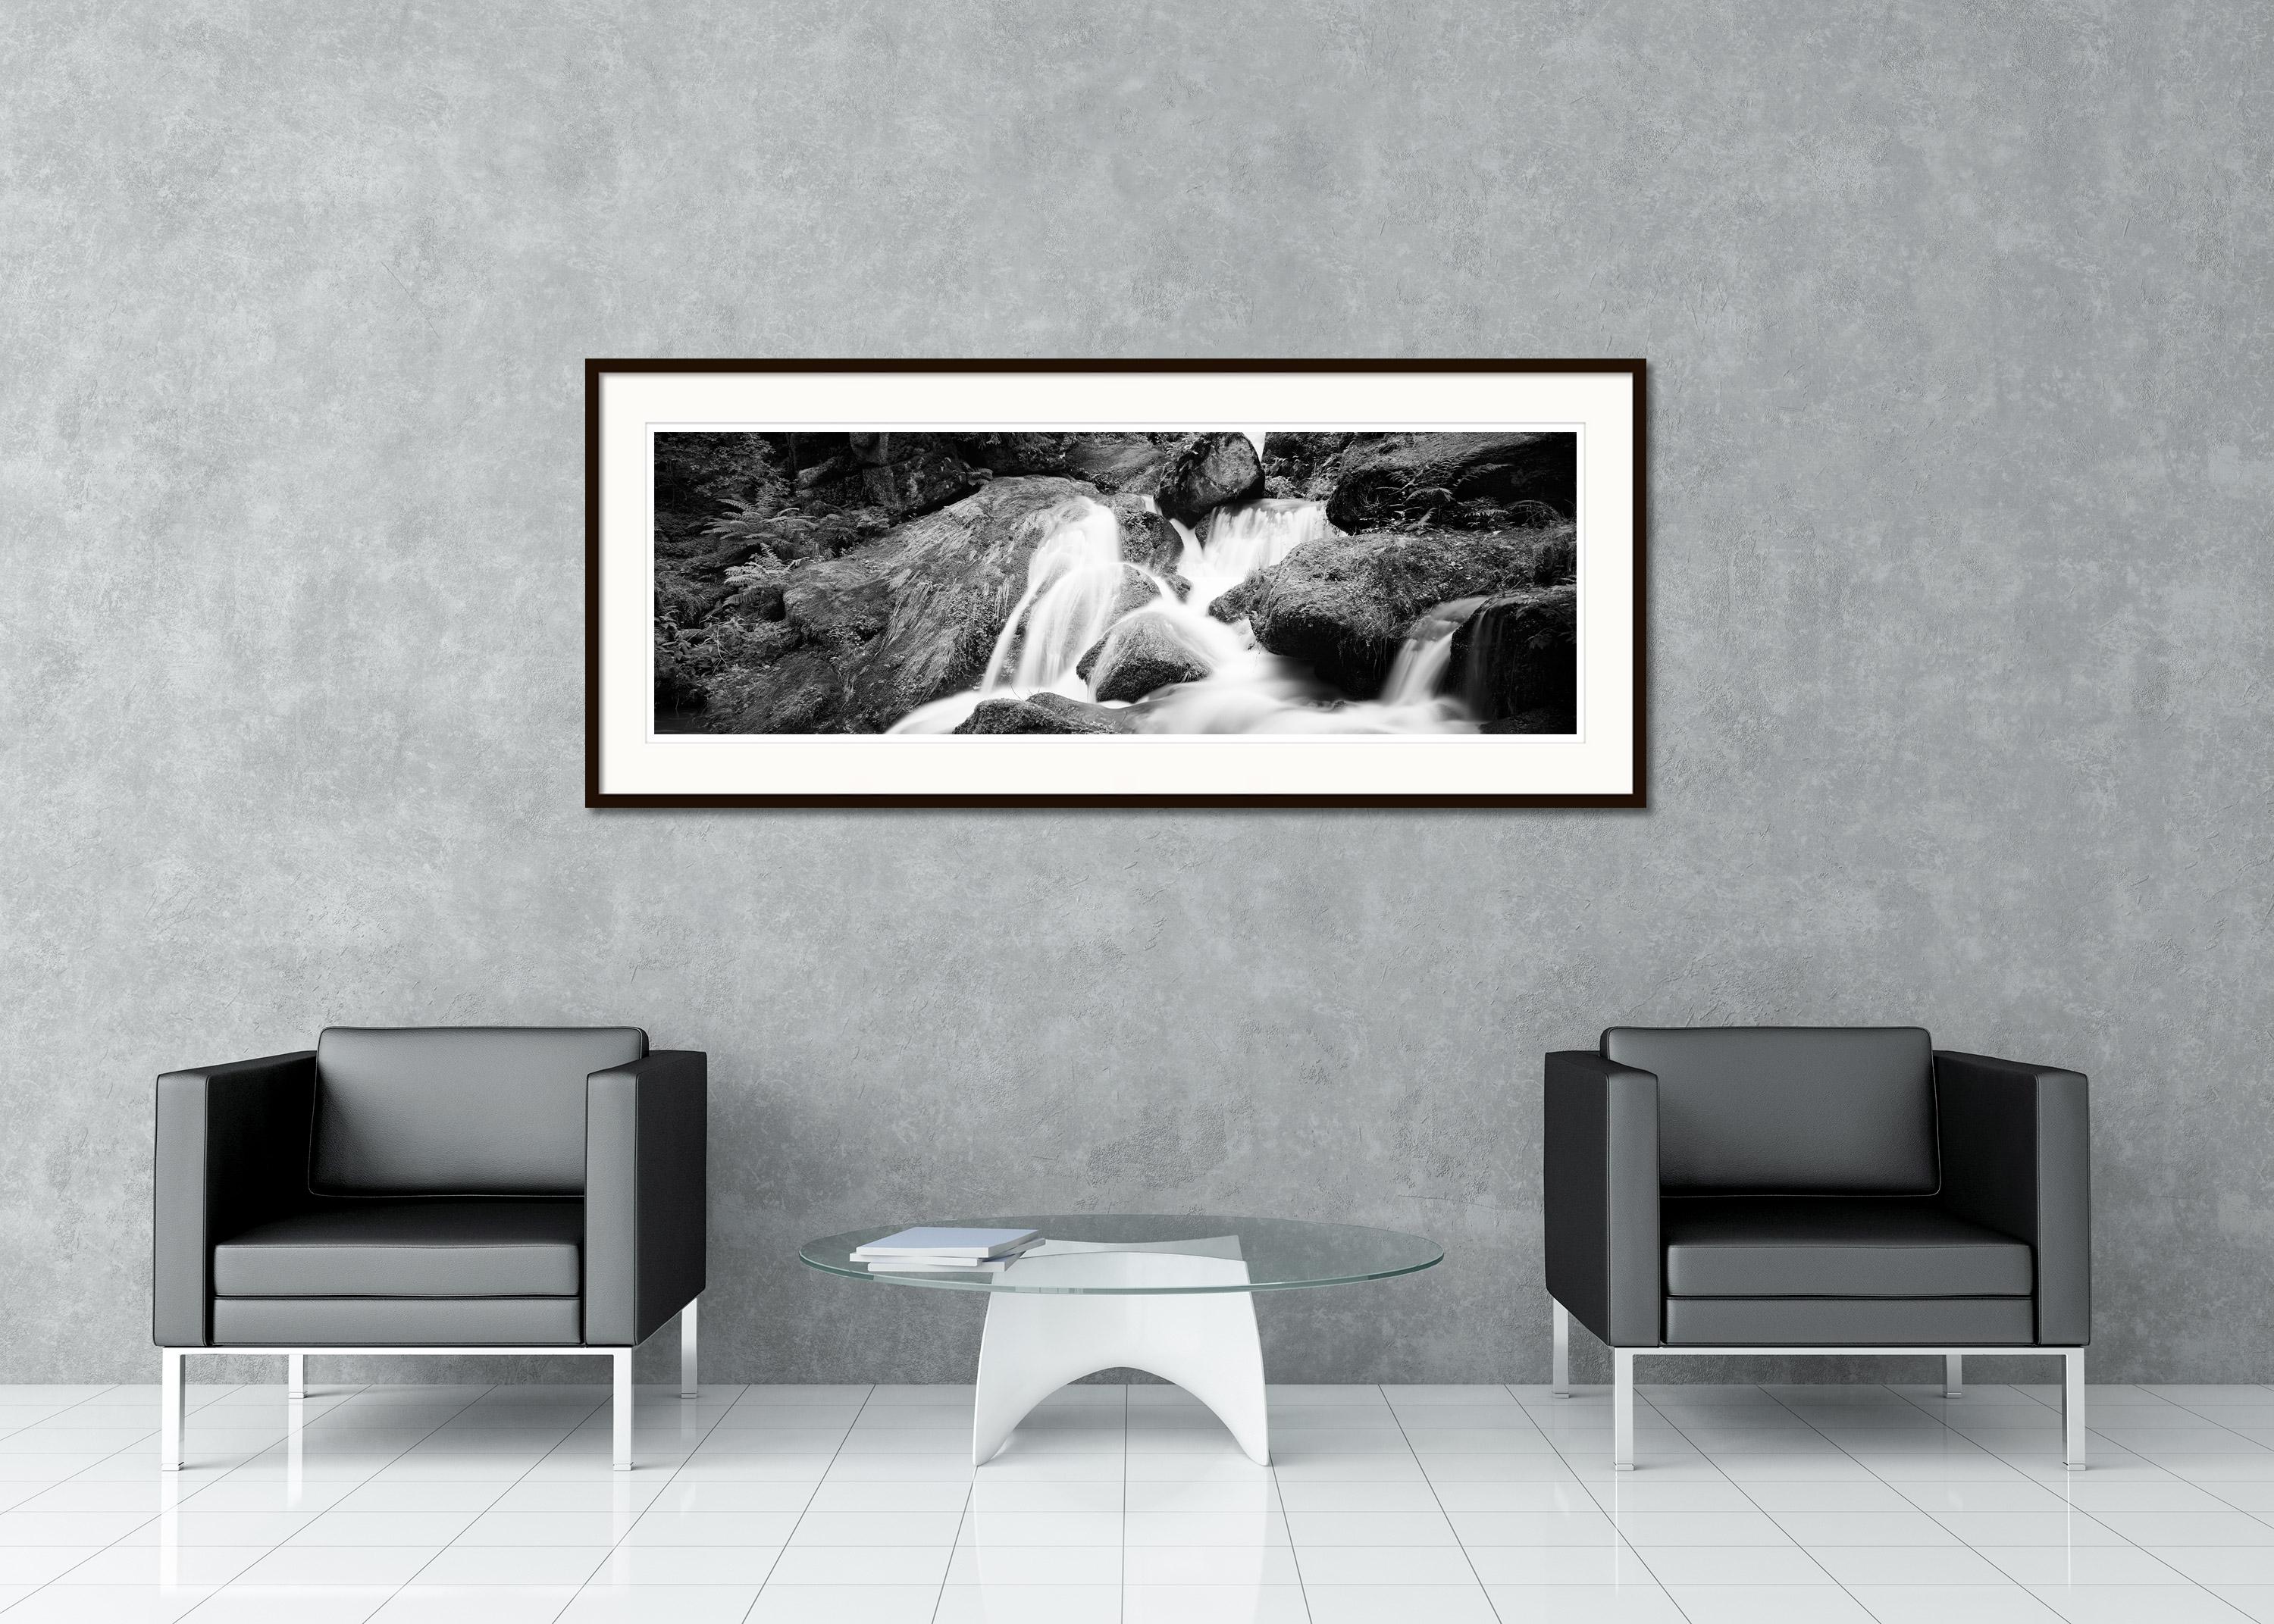 Black and White Fine Art Panorama Photography - Detail of a beautiful stream with a waterfall in the mountains of Austria. Archival pigment ink print, edition of 9. Signed, titled, dated and numbered by artist. Certificate of authenticity included.